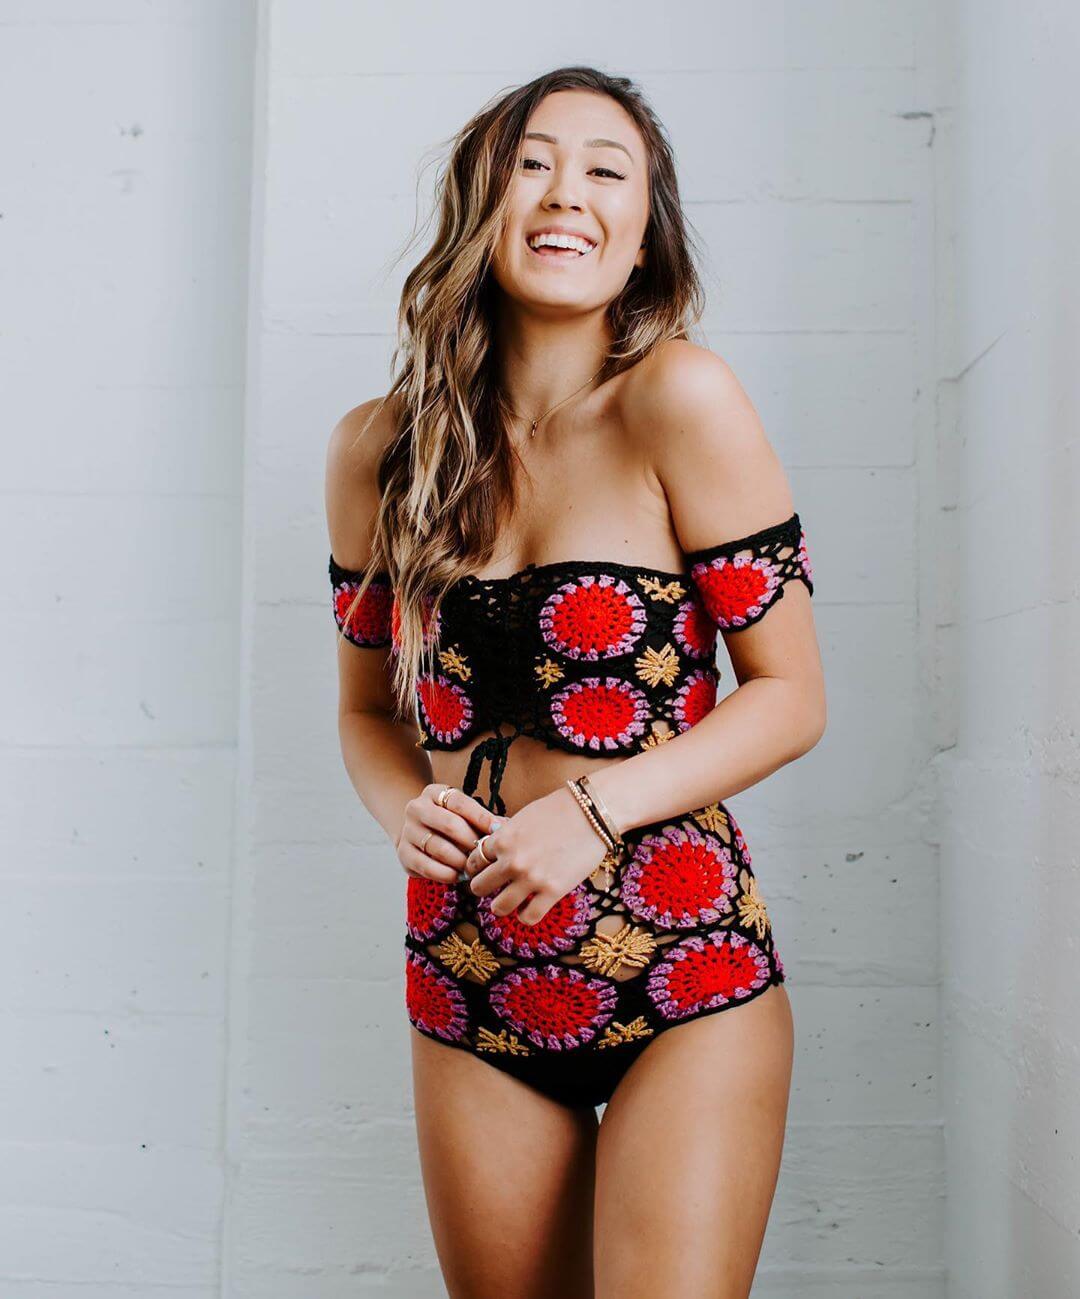 51 Hottest LaurDIY Big Butt Pictures Which Will Make You Swelter All Over 23